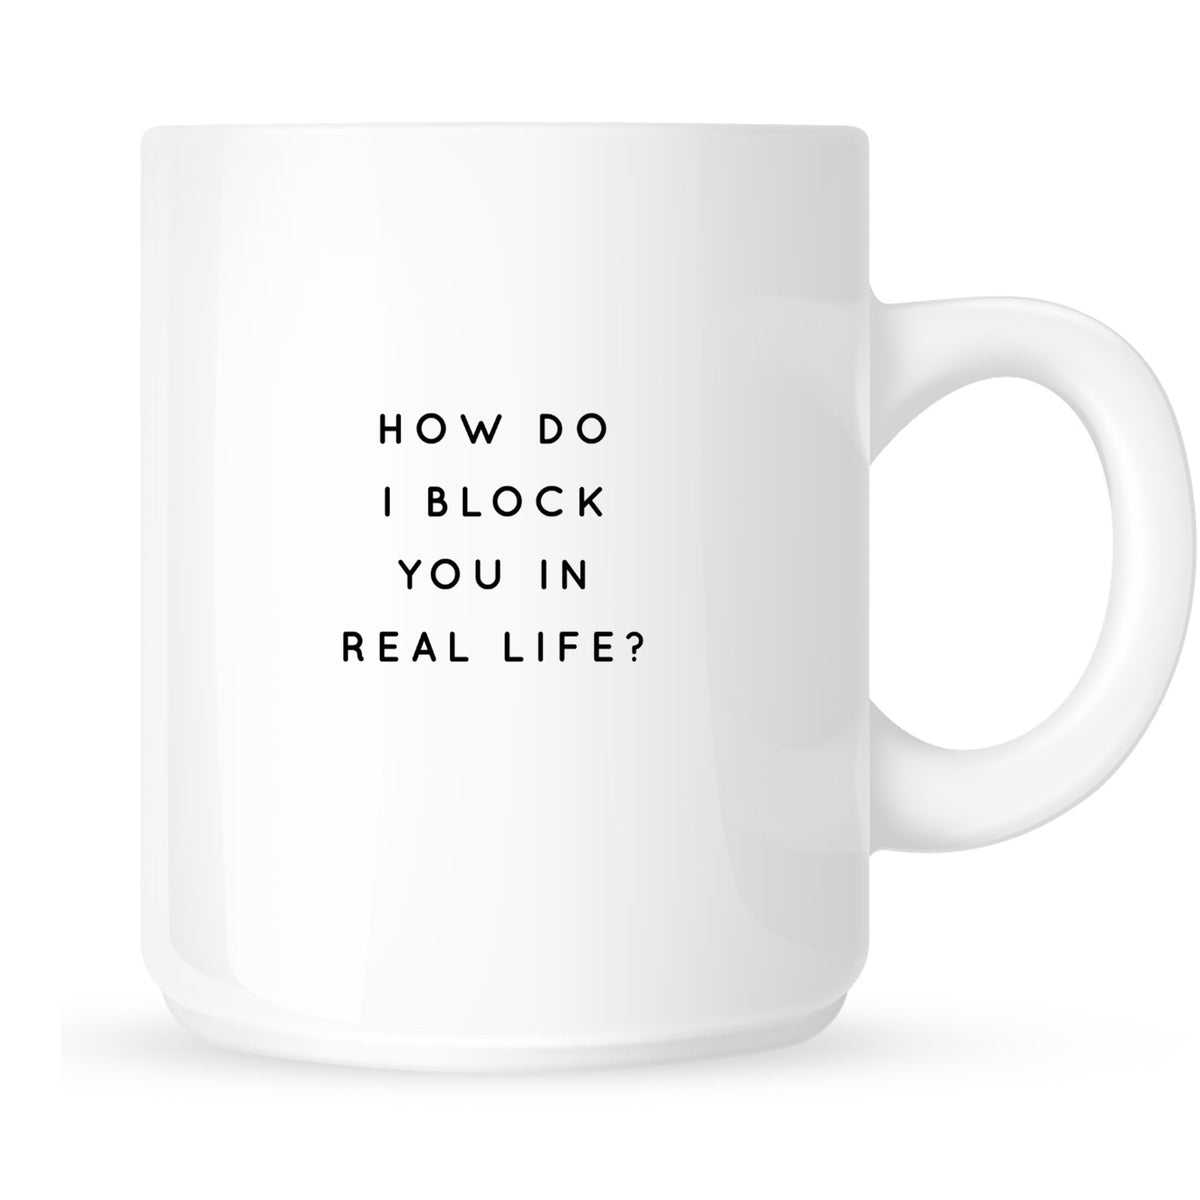 Mug - How Do I Block You In Real Life?